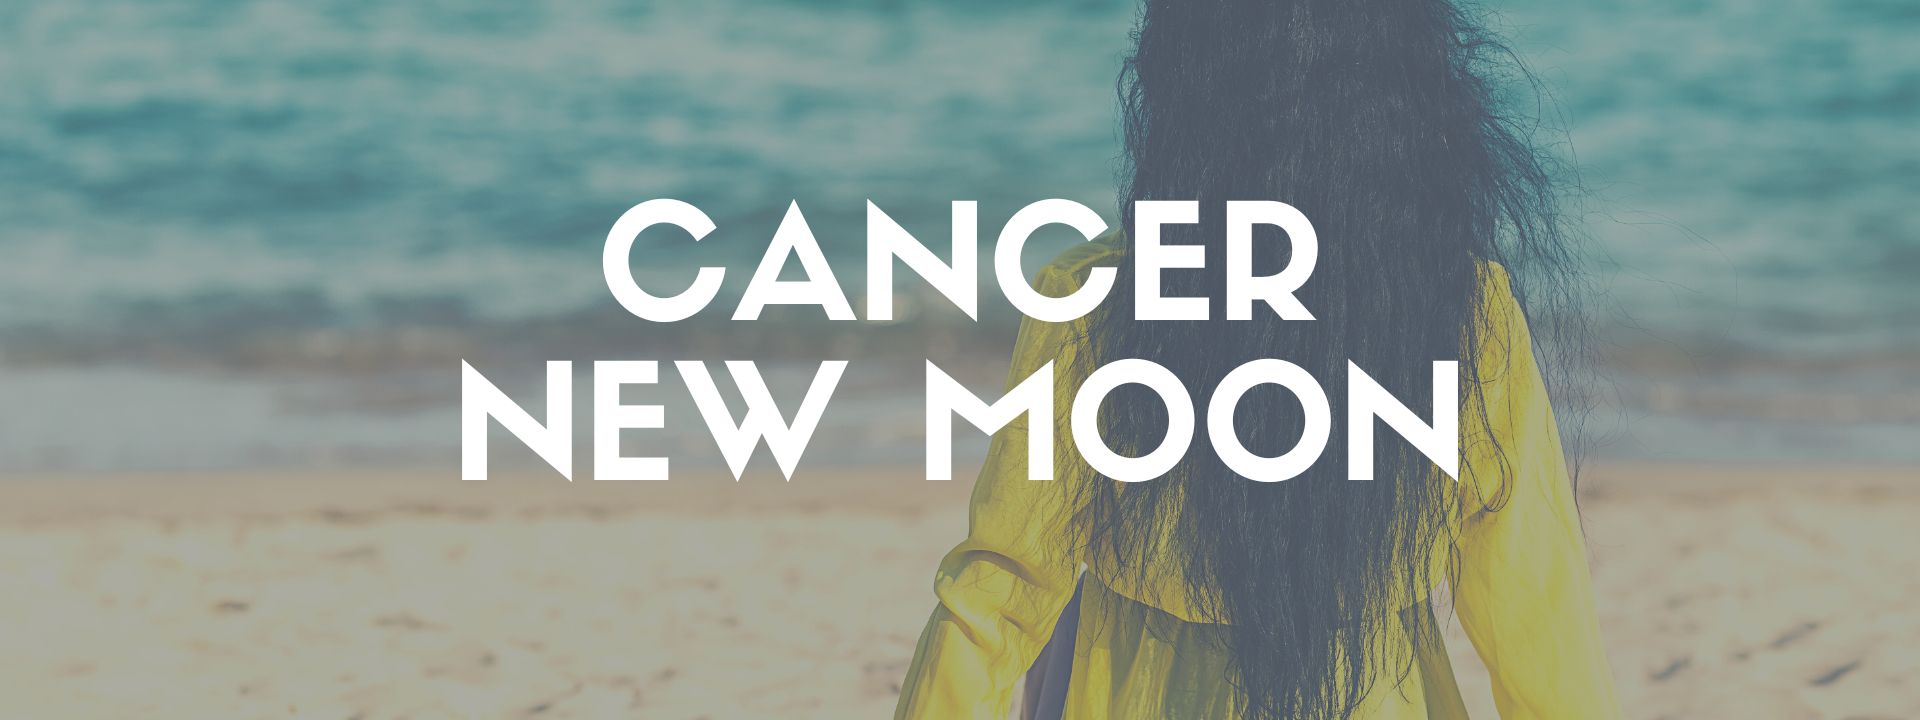 July 2023 New & Full Moons: Full Moon in Capricorn & New Moon in Cancer - The Dark Pixie Astrology